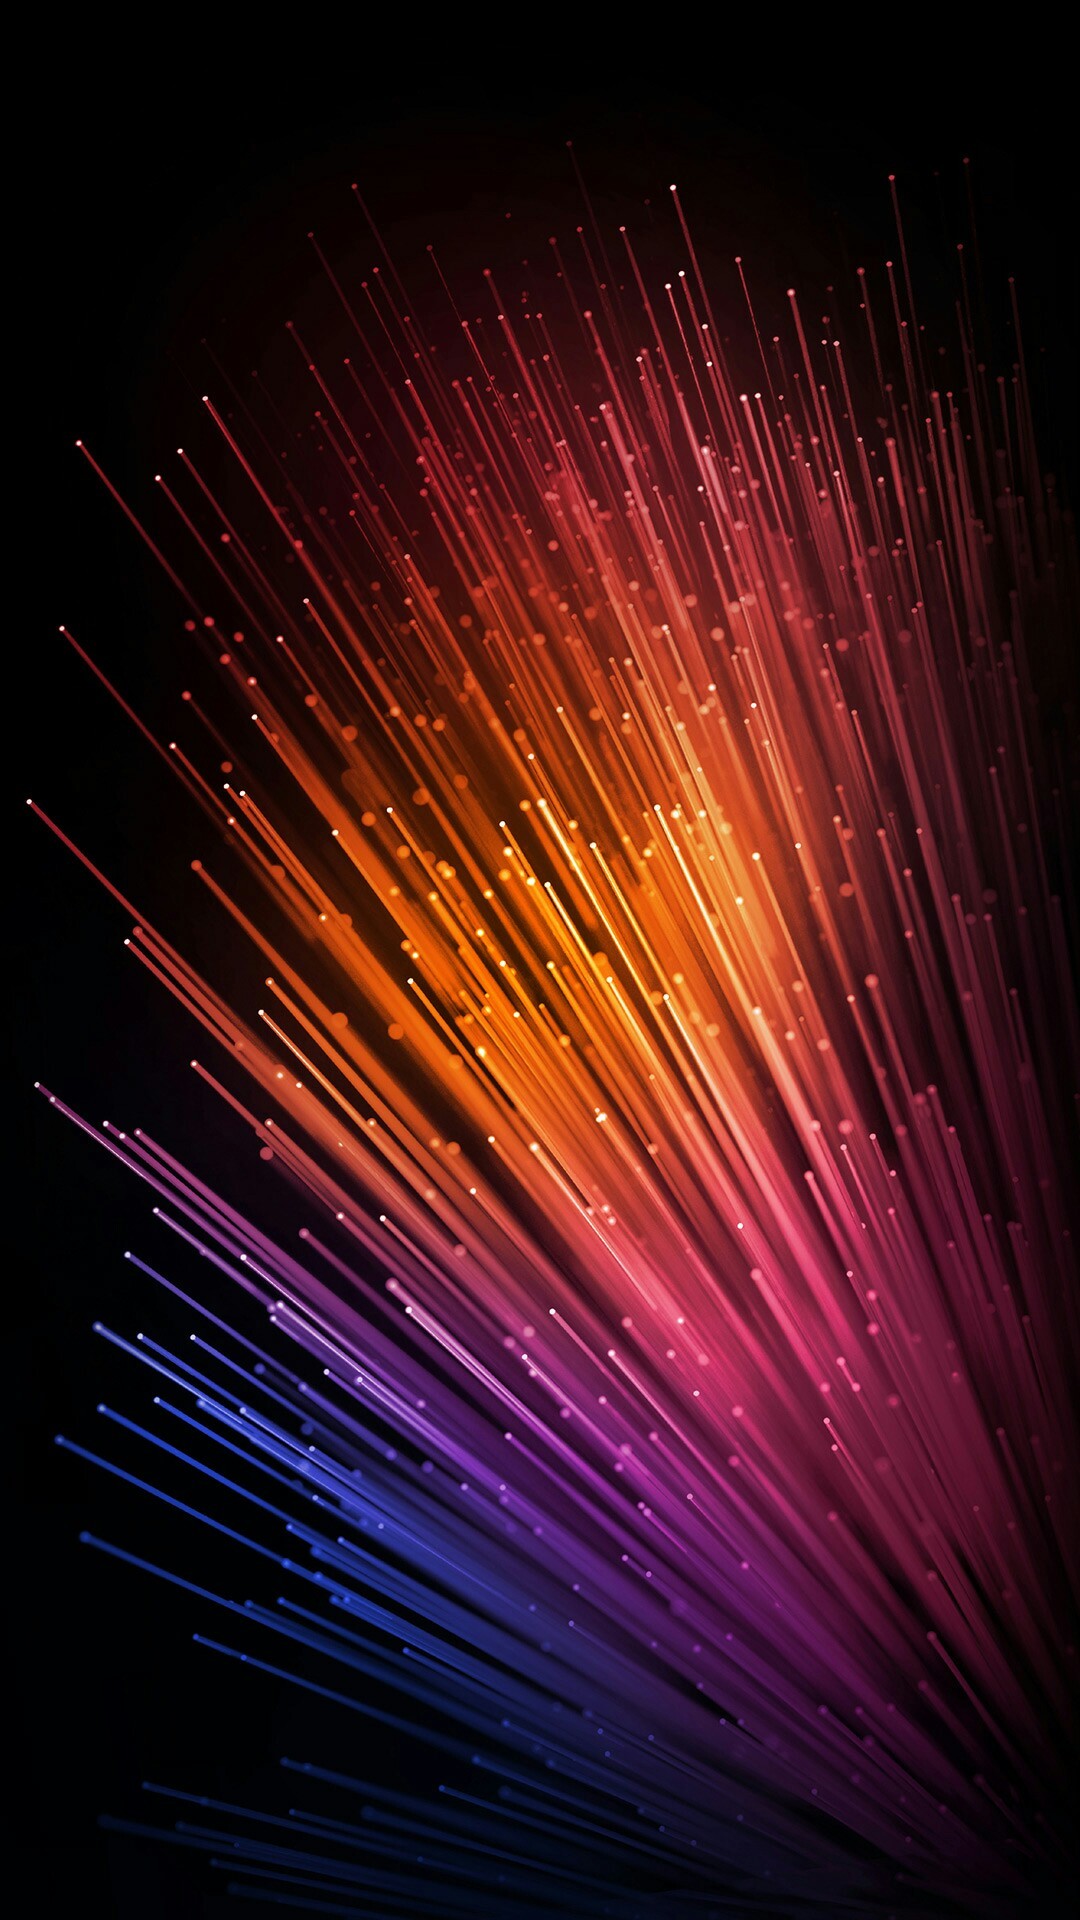 Get The Beautiful Live Wallpapers From Iphone 6s As - Redmi Note 4 Wallpaper Hd , HD Wallpaper & Backgrounds